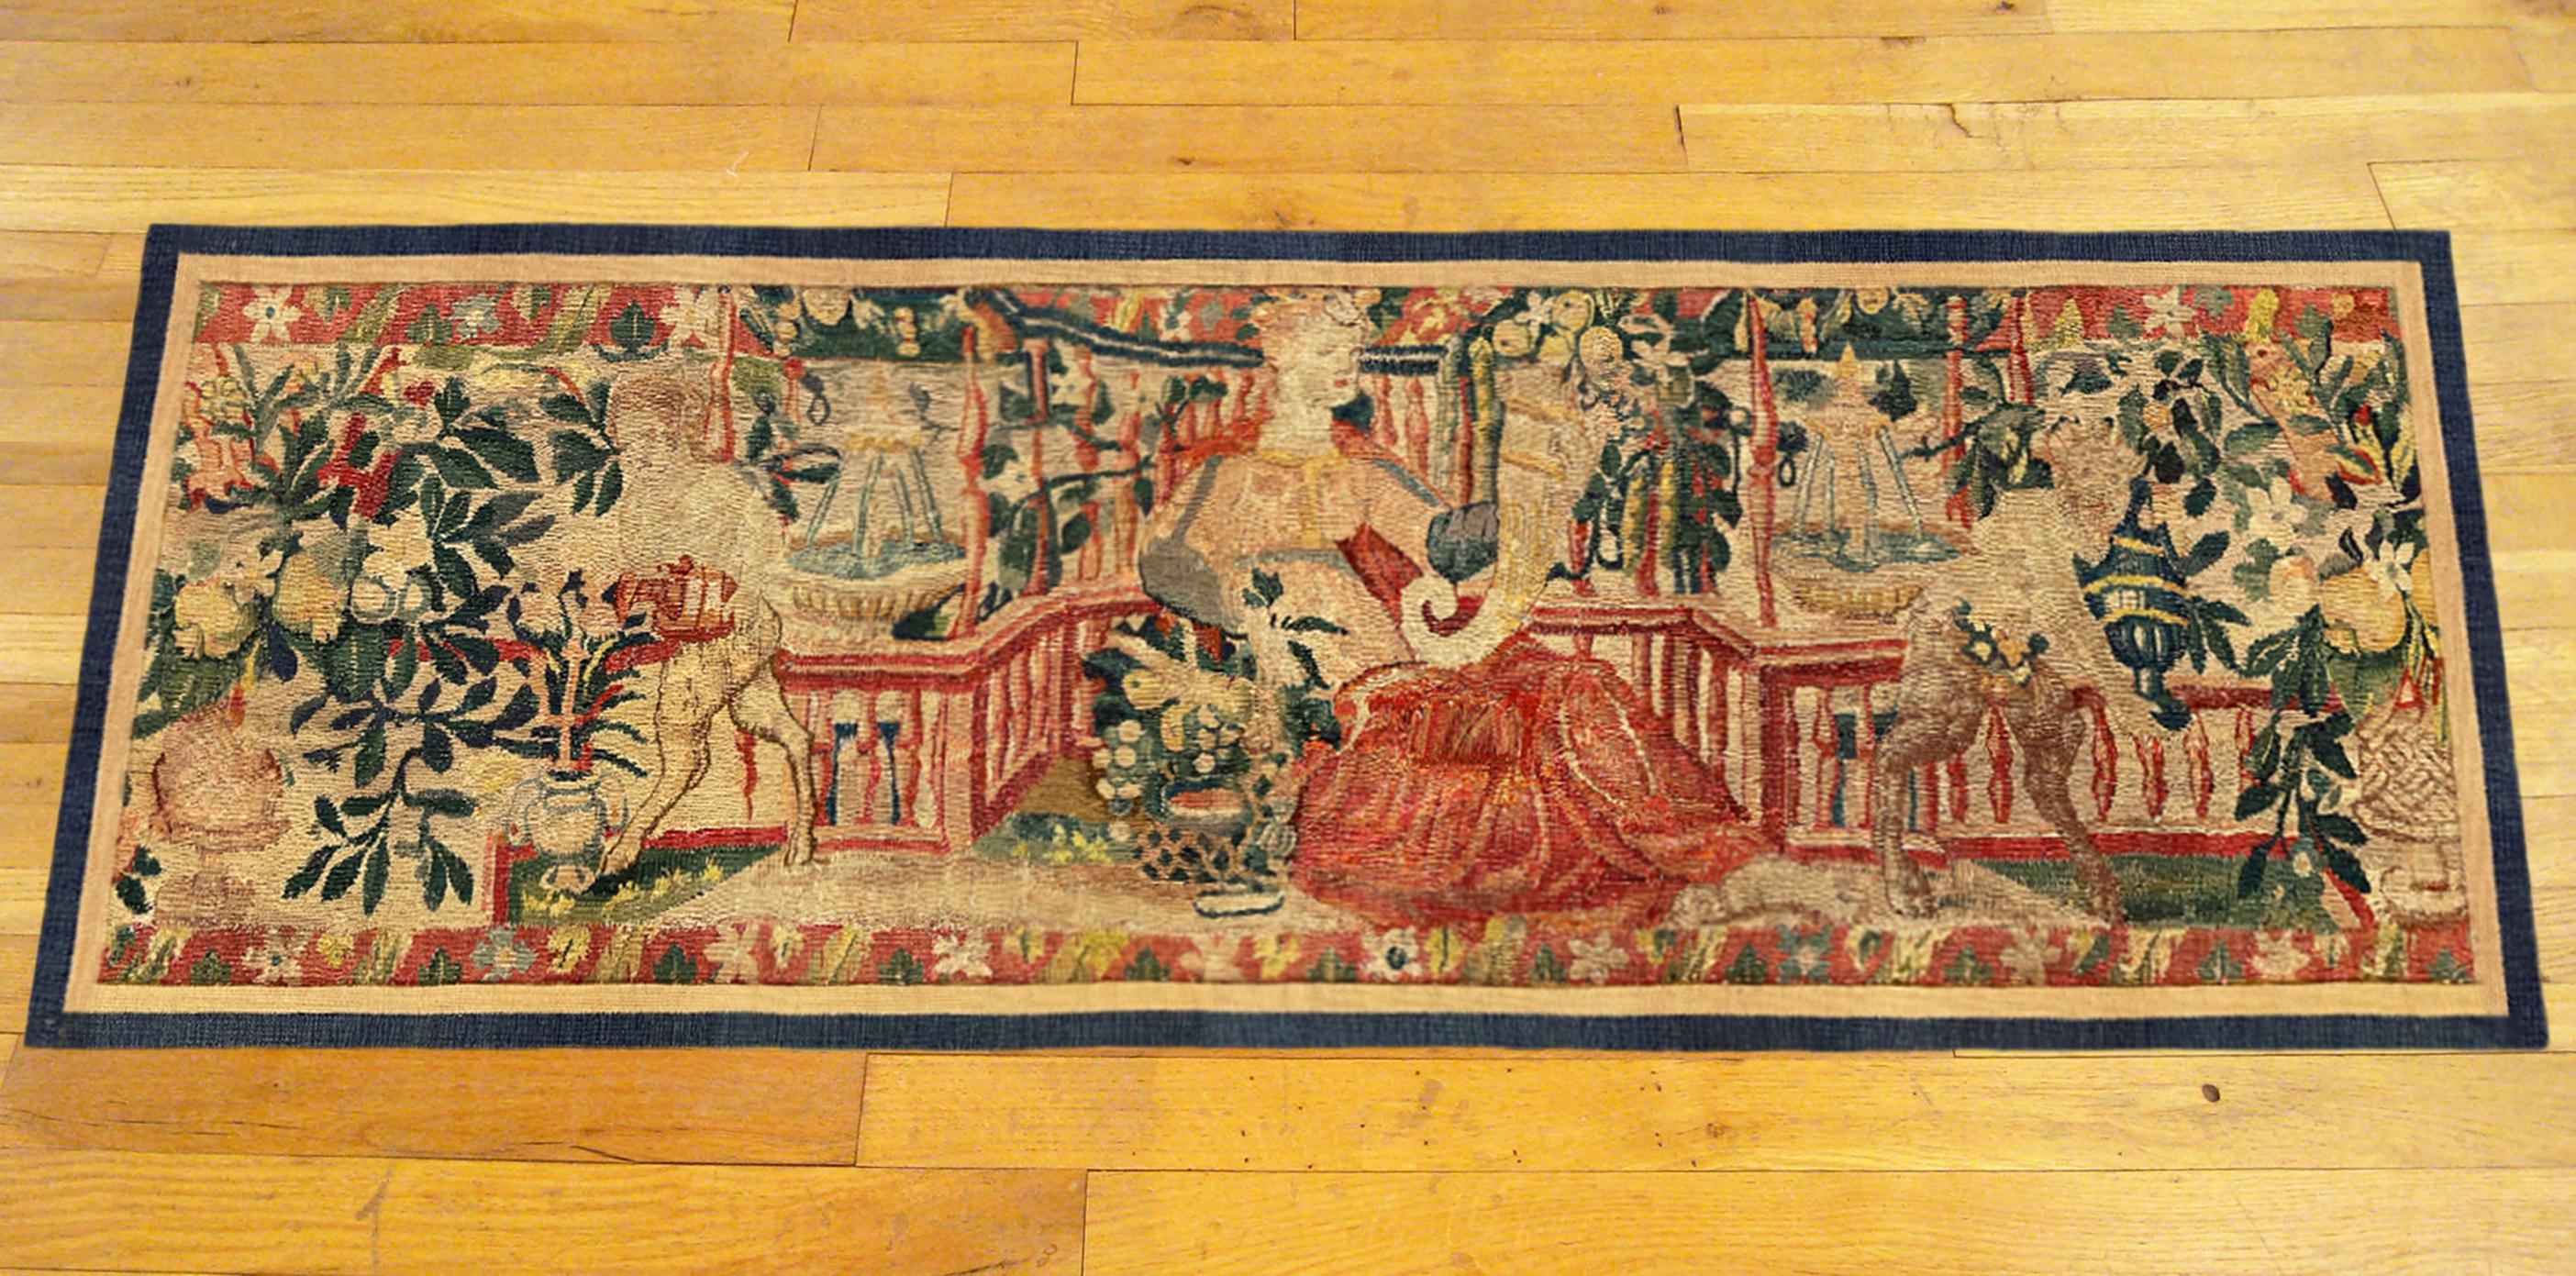 A late 16th century Flemish mythological tapestry panel. This horizontally oriented decorative tapestry panel depicts a female figure at center, holding a cornucopia in one hand, with satyrs flanking her at both sides, within a setting of flowers